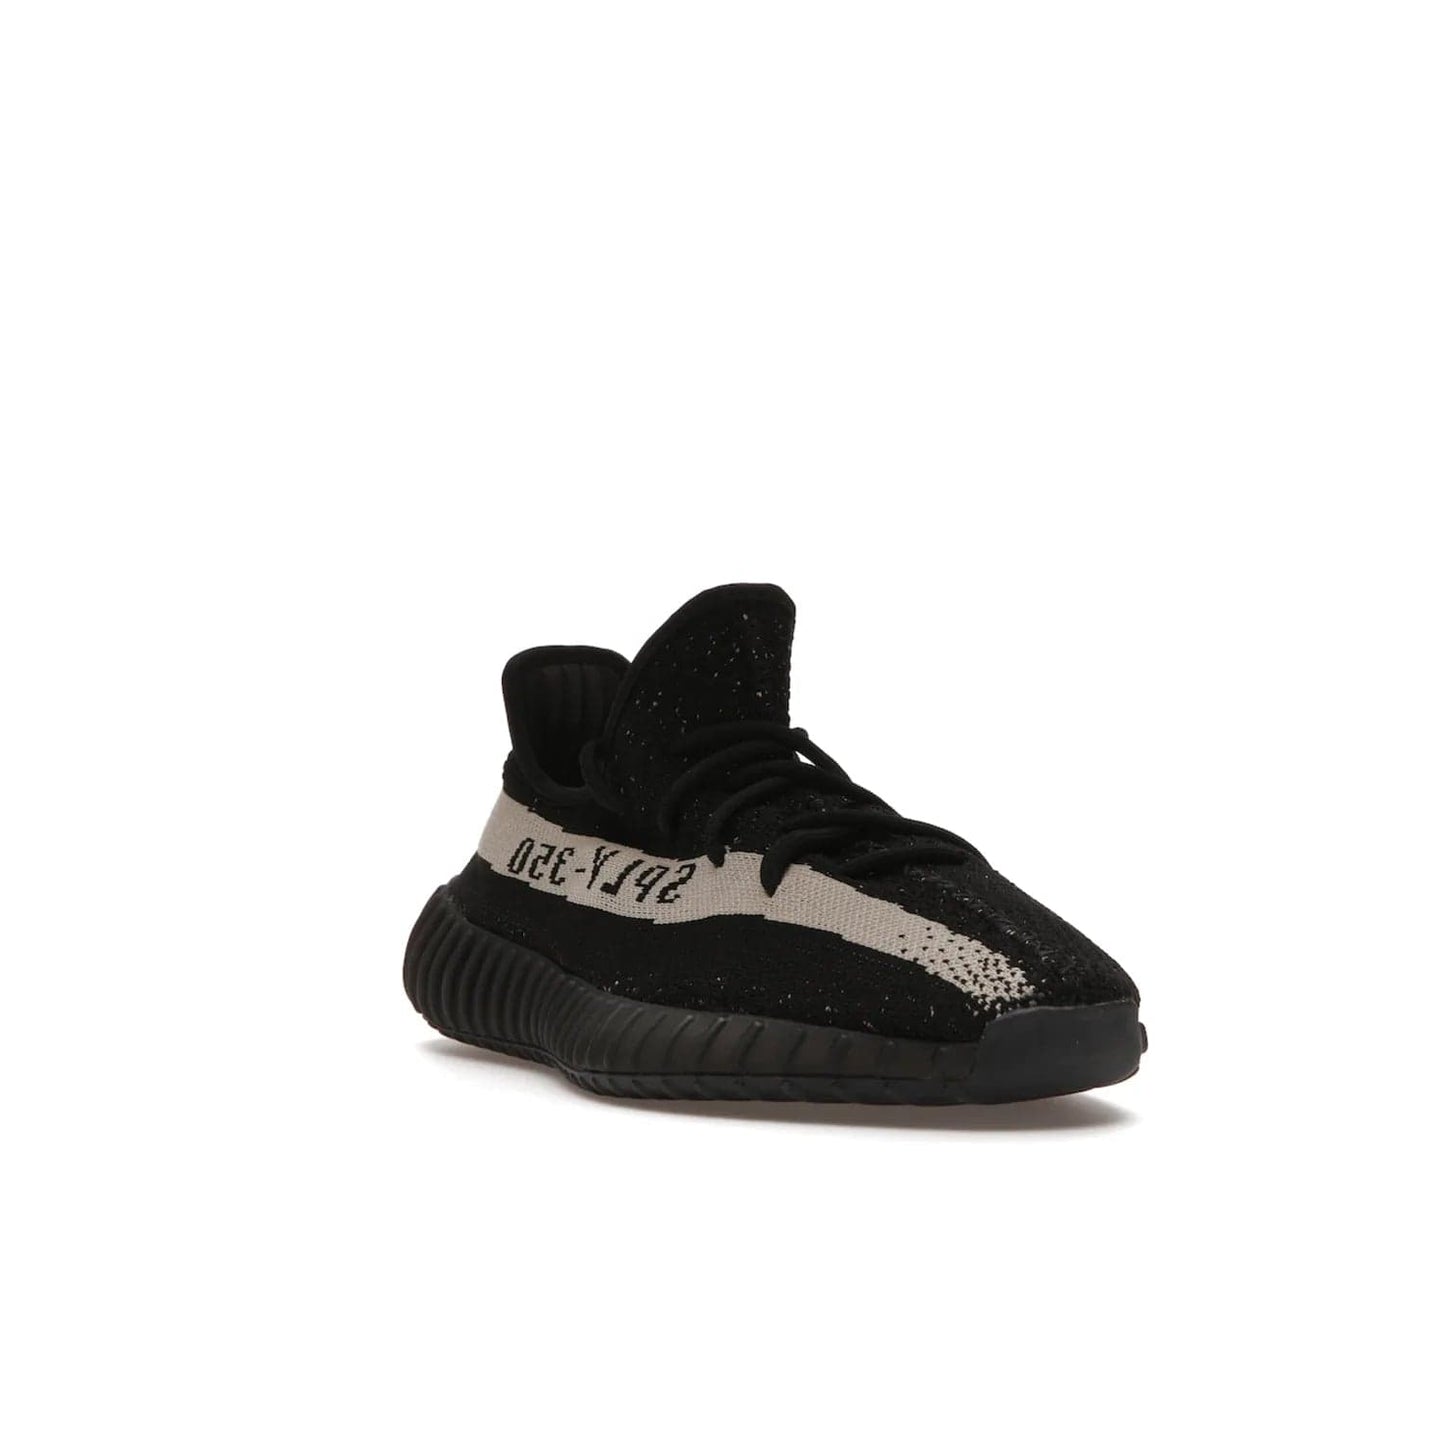 adidas Yeezy Boost 350 V2 Core Black White (2016/2022) - Image 7 - Only at www.BallersClubKickz.com - Stylish adidas Yeezy Boost 350 V2 in classic black with white "SPLY-350" stitched to the side stripe. Features Primeknit upper & Boost sole for comfort. Restock in March 2022.